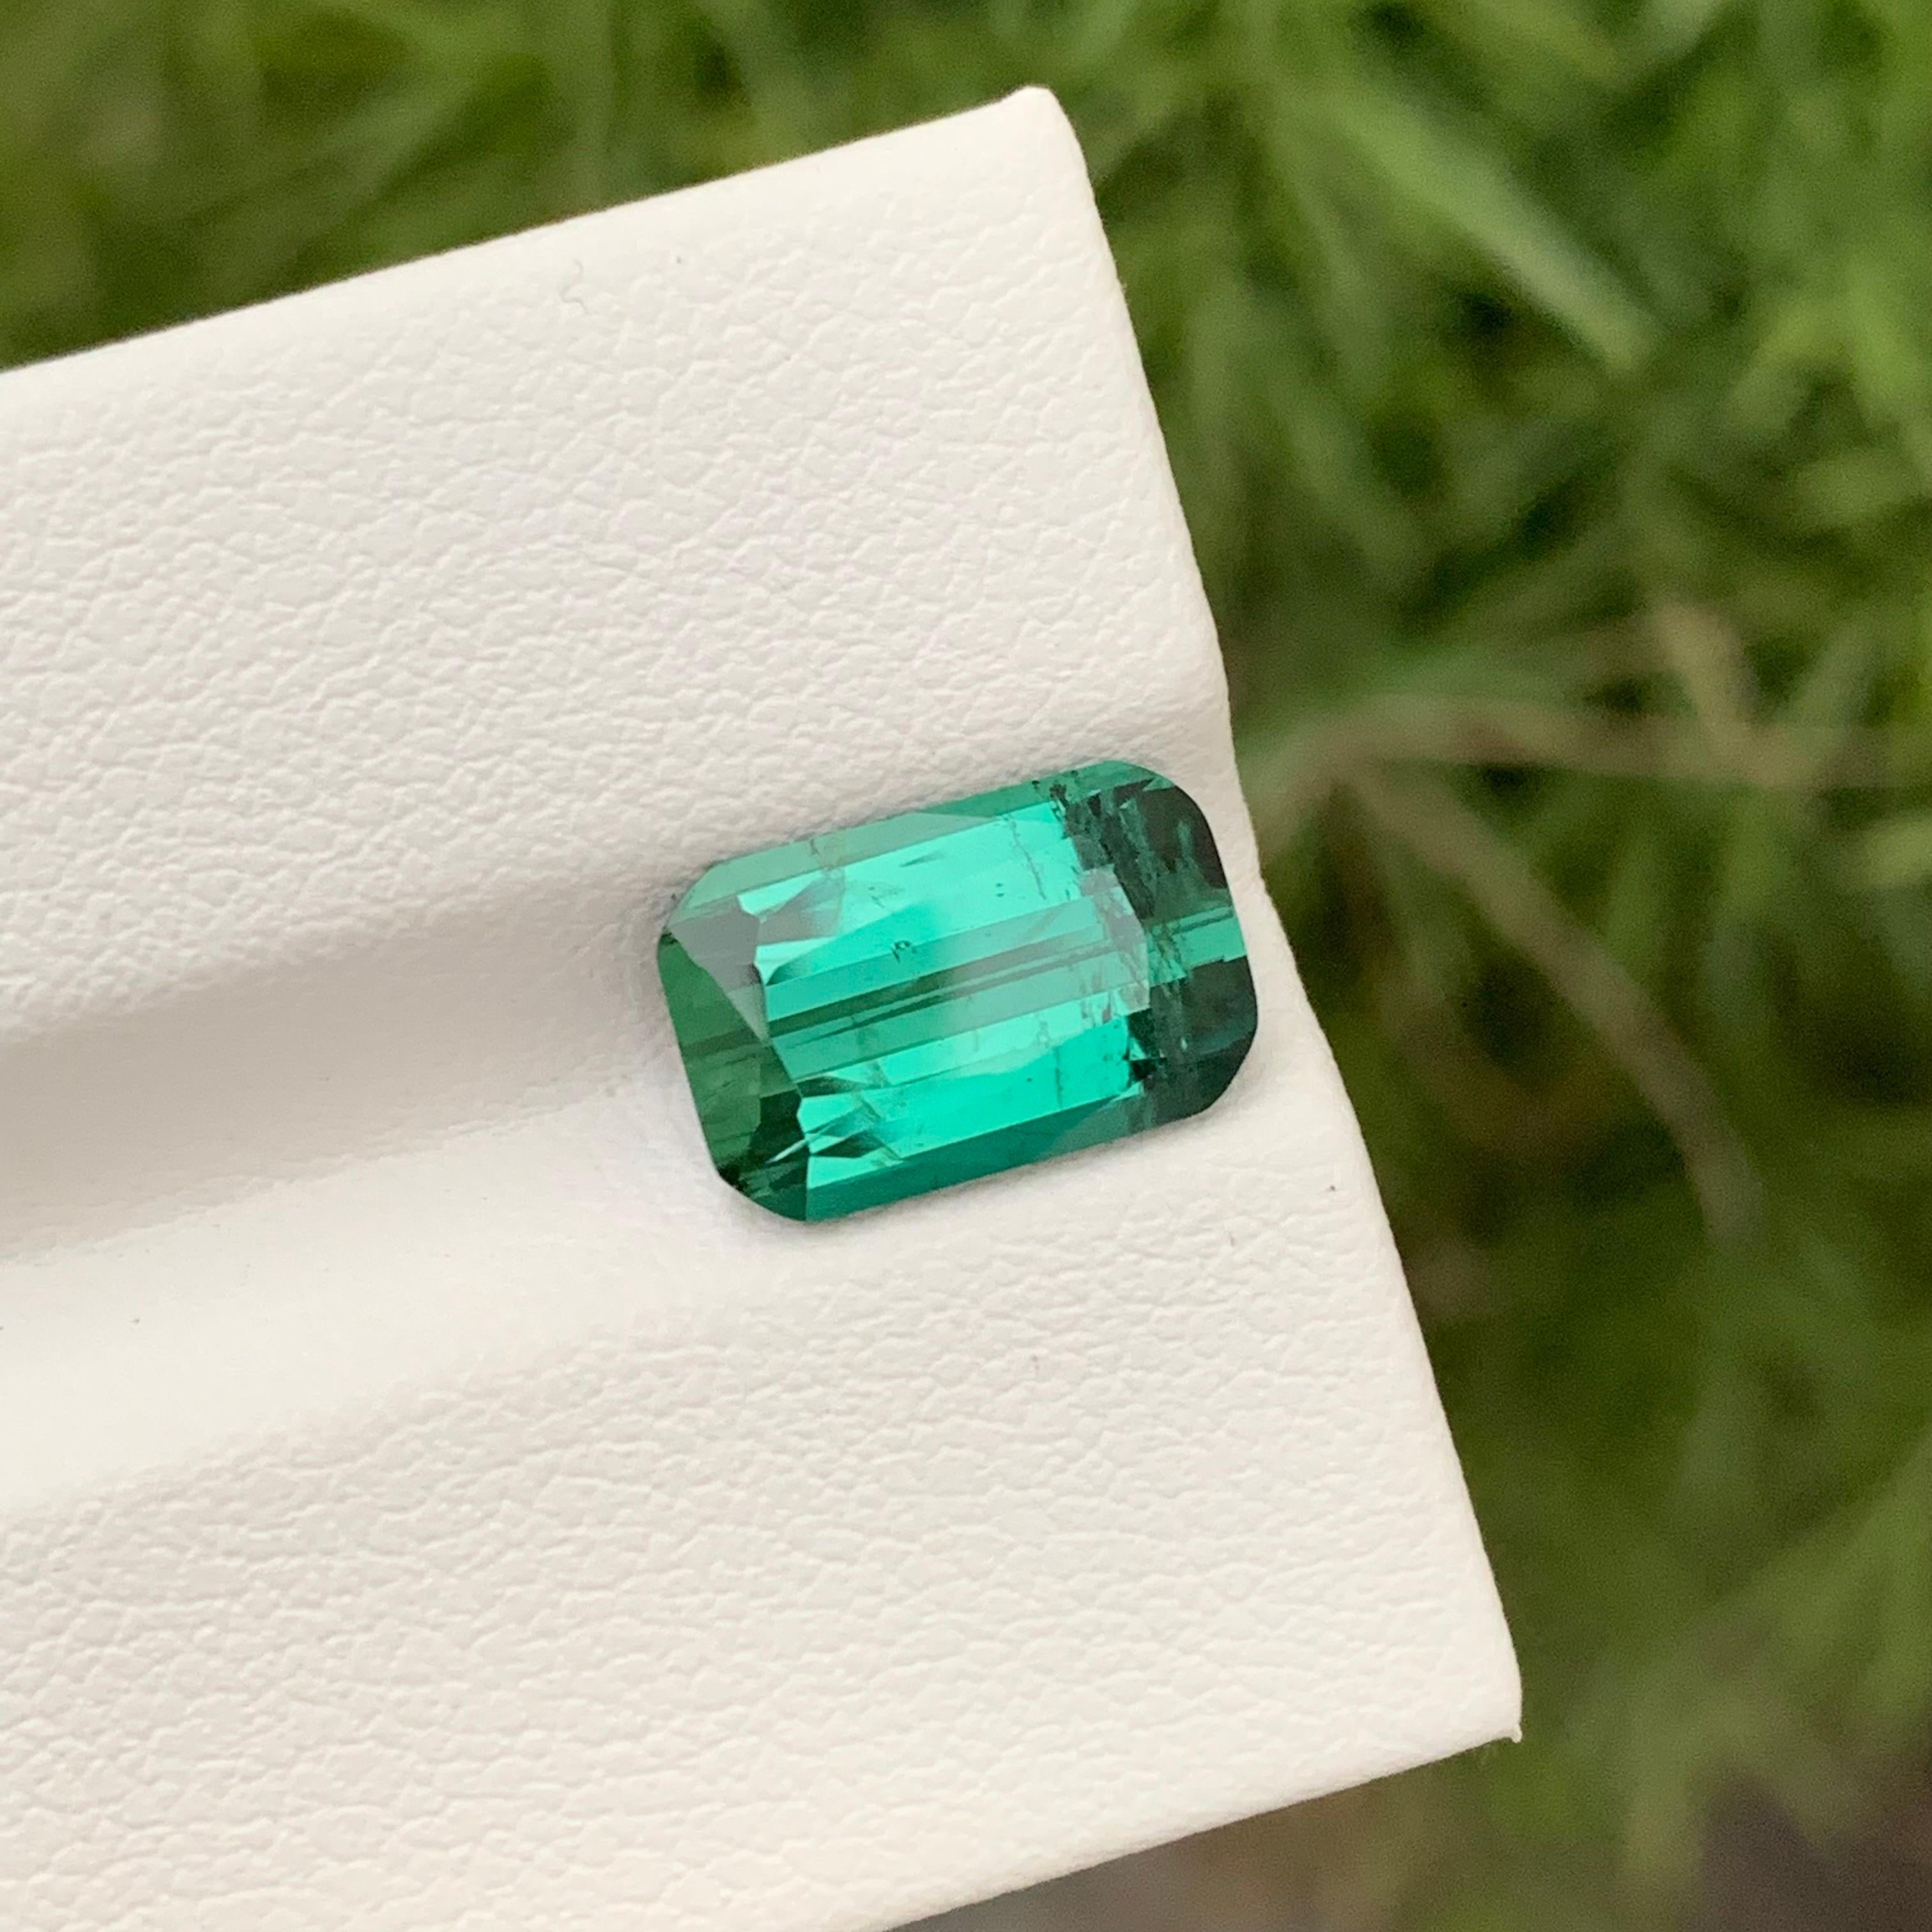 Loose Lagoon Tourmaline
Weight: 3.80 Carats
Dimension: 11.4 x 7.3 x 5 Mm
Origin: Afghanistan
Treatment: Non
Certificate: On Demand
Shape: Cushion

Lagoon tourmaline, a captivating gemstone named for the tranquil and mesmerizing colors found in